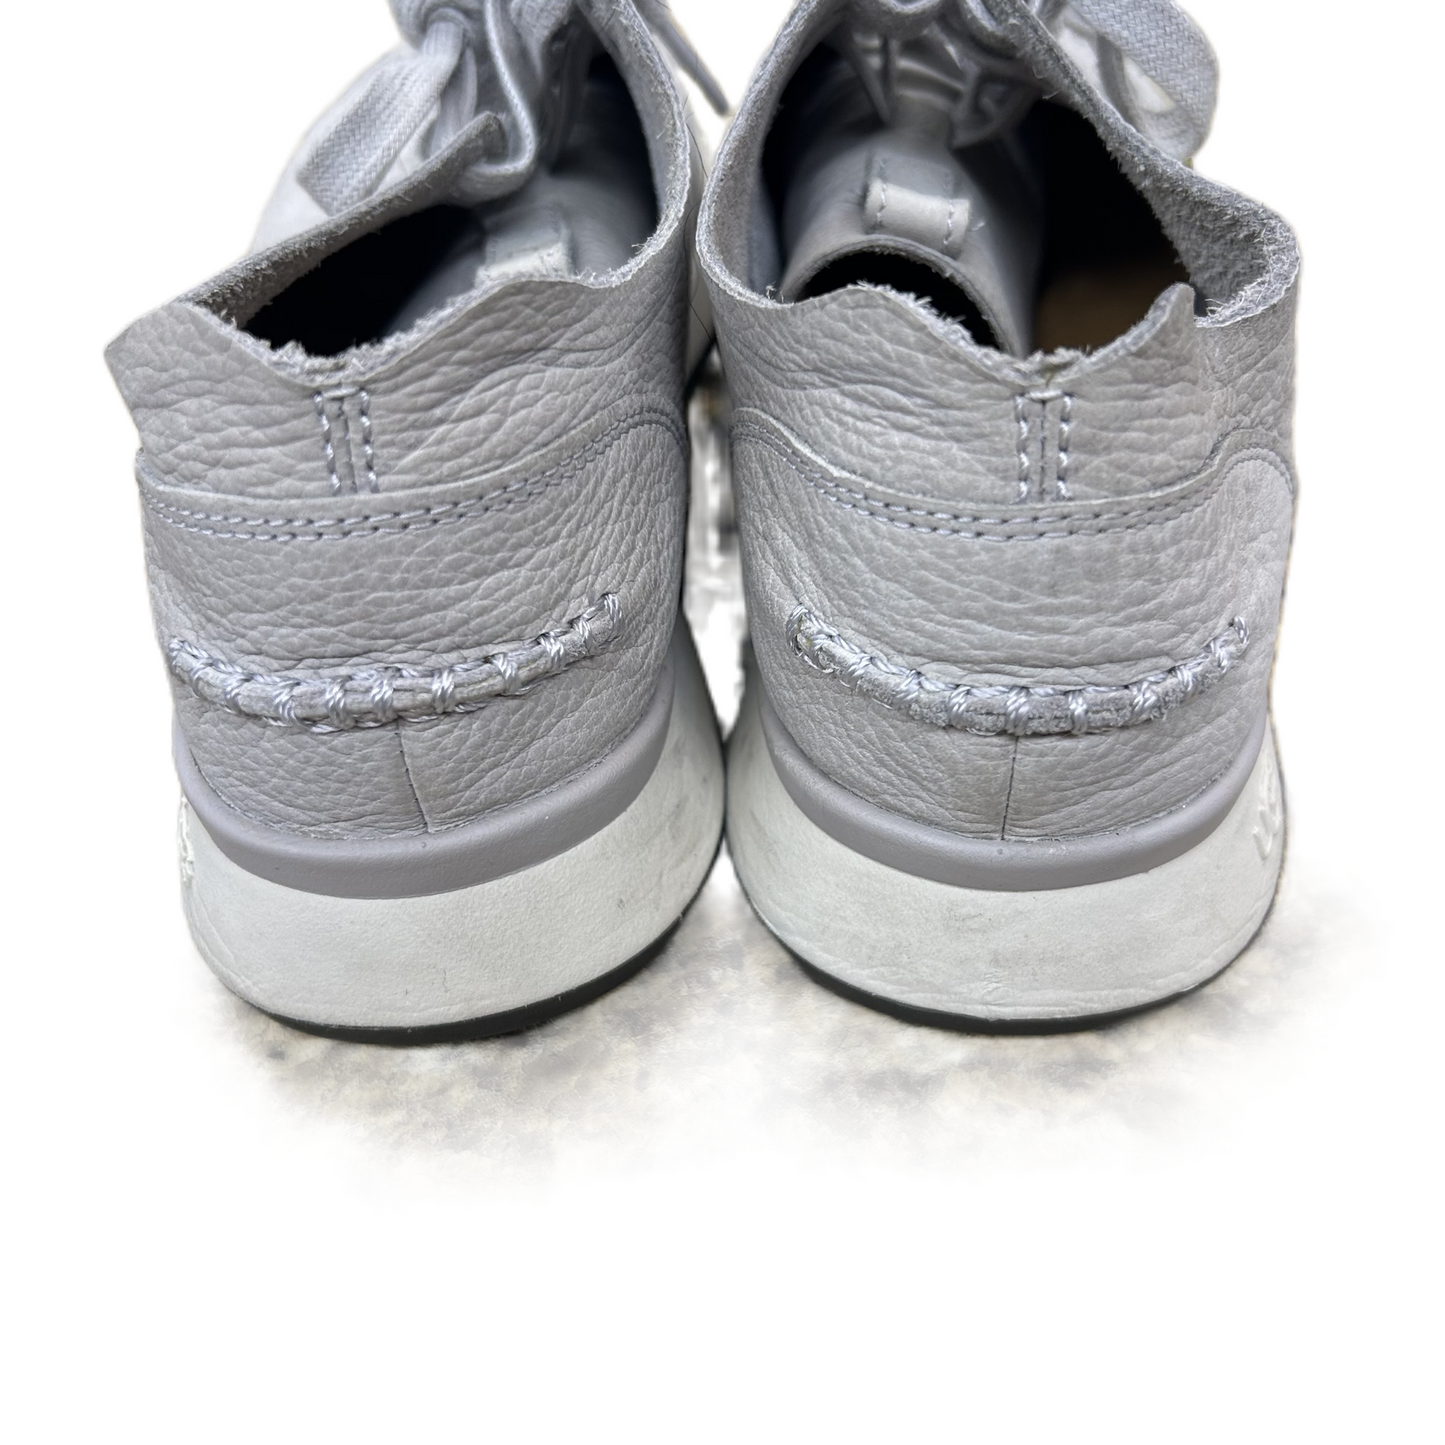 Grey Shoes Sneakers By Ugg, Size: 8.5